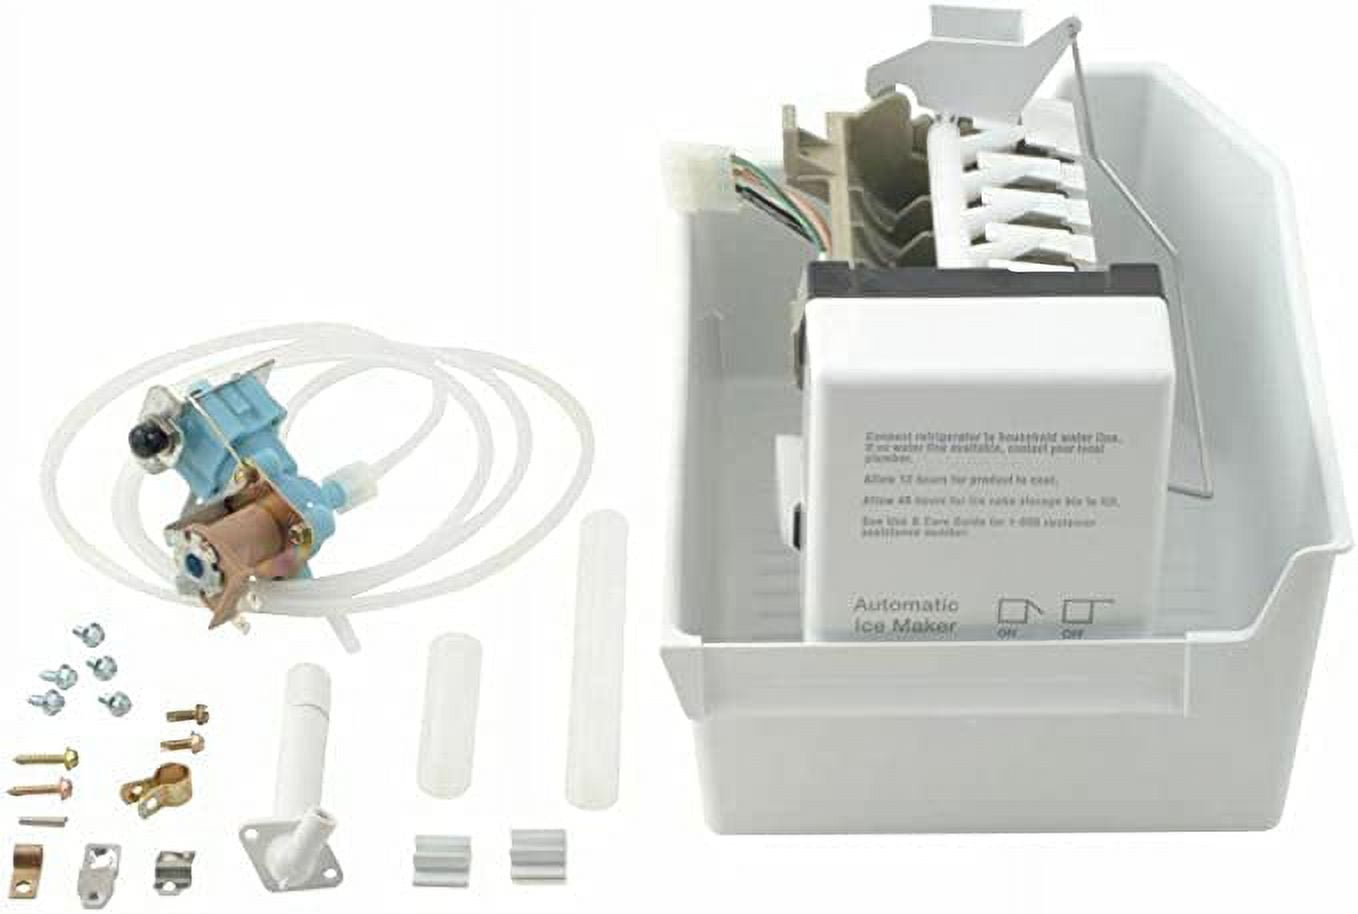 W10715708 Refrigerator Ice Maker Kit Replacement for Whirlpool / KitchenAid  > Speedy Appliance Parts